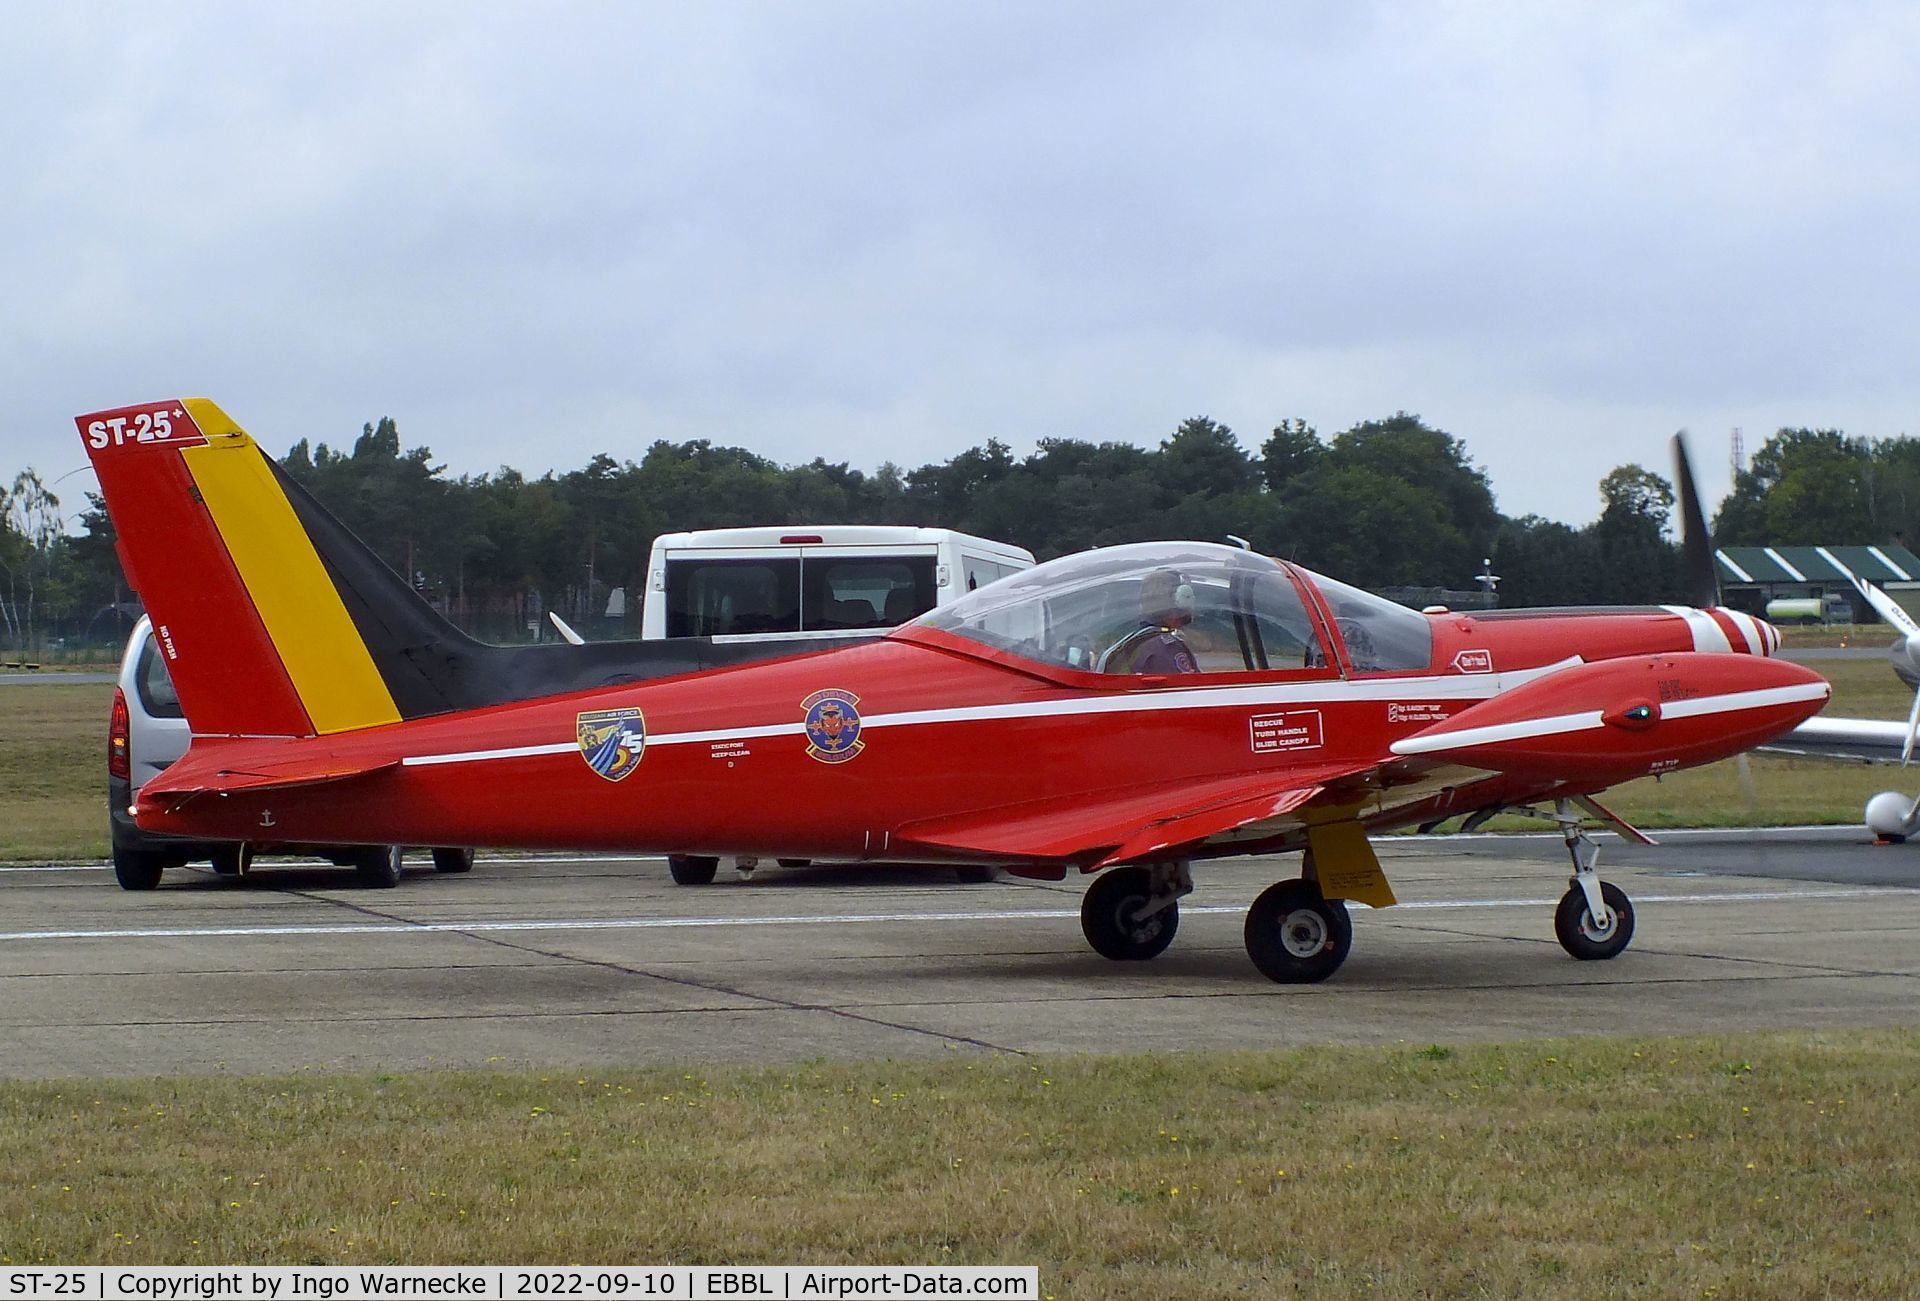 ST-25, 1970 SIAI-Marchetti SF-260MB C/N 10-25, SIAI-Marchetti SF.260MB of the FAeB (Belgian Air Force) 'Diables Rouges / Red Devils' aerobatic team at the 2022 Sanicole Spottersday at Kleine Brogel air base